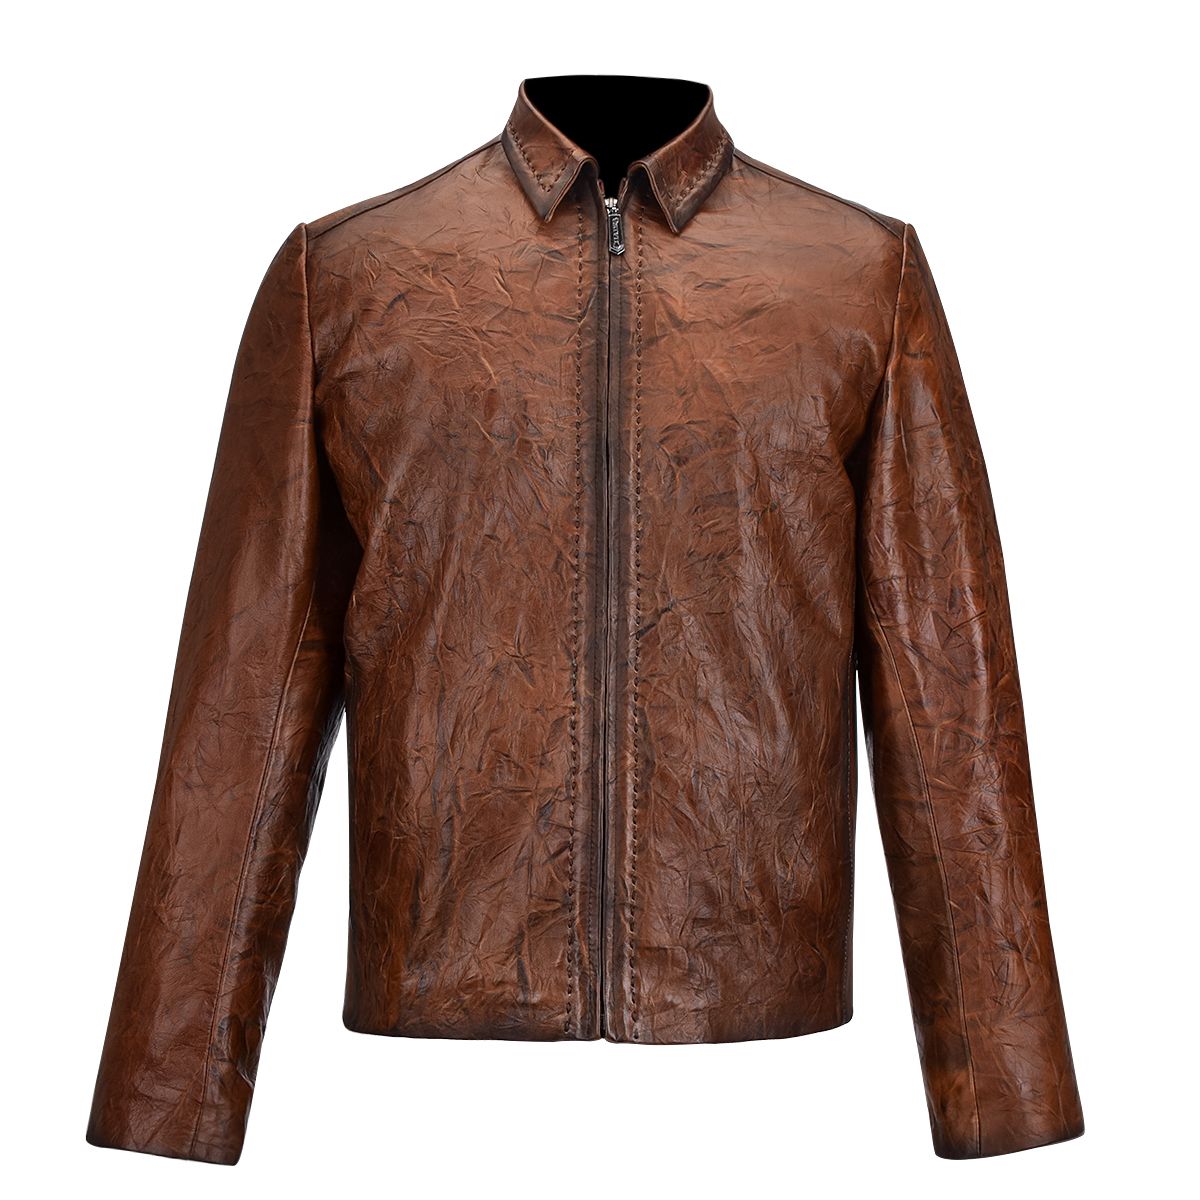 H276COC - Cuadra honey casual fashion lambskin quilted blouson jacket for men-Kuet.us